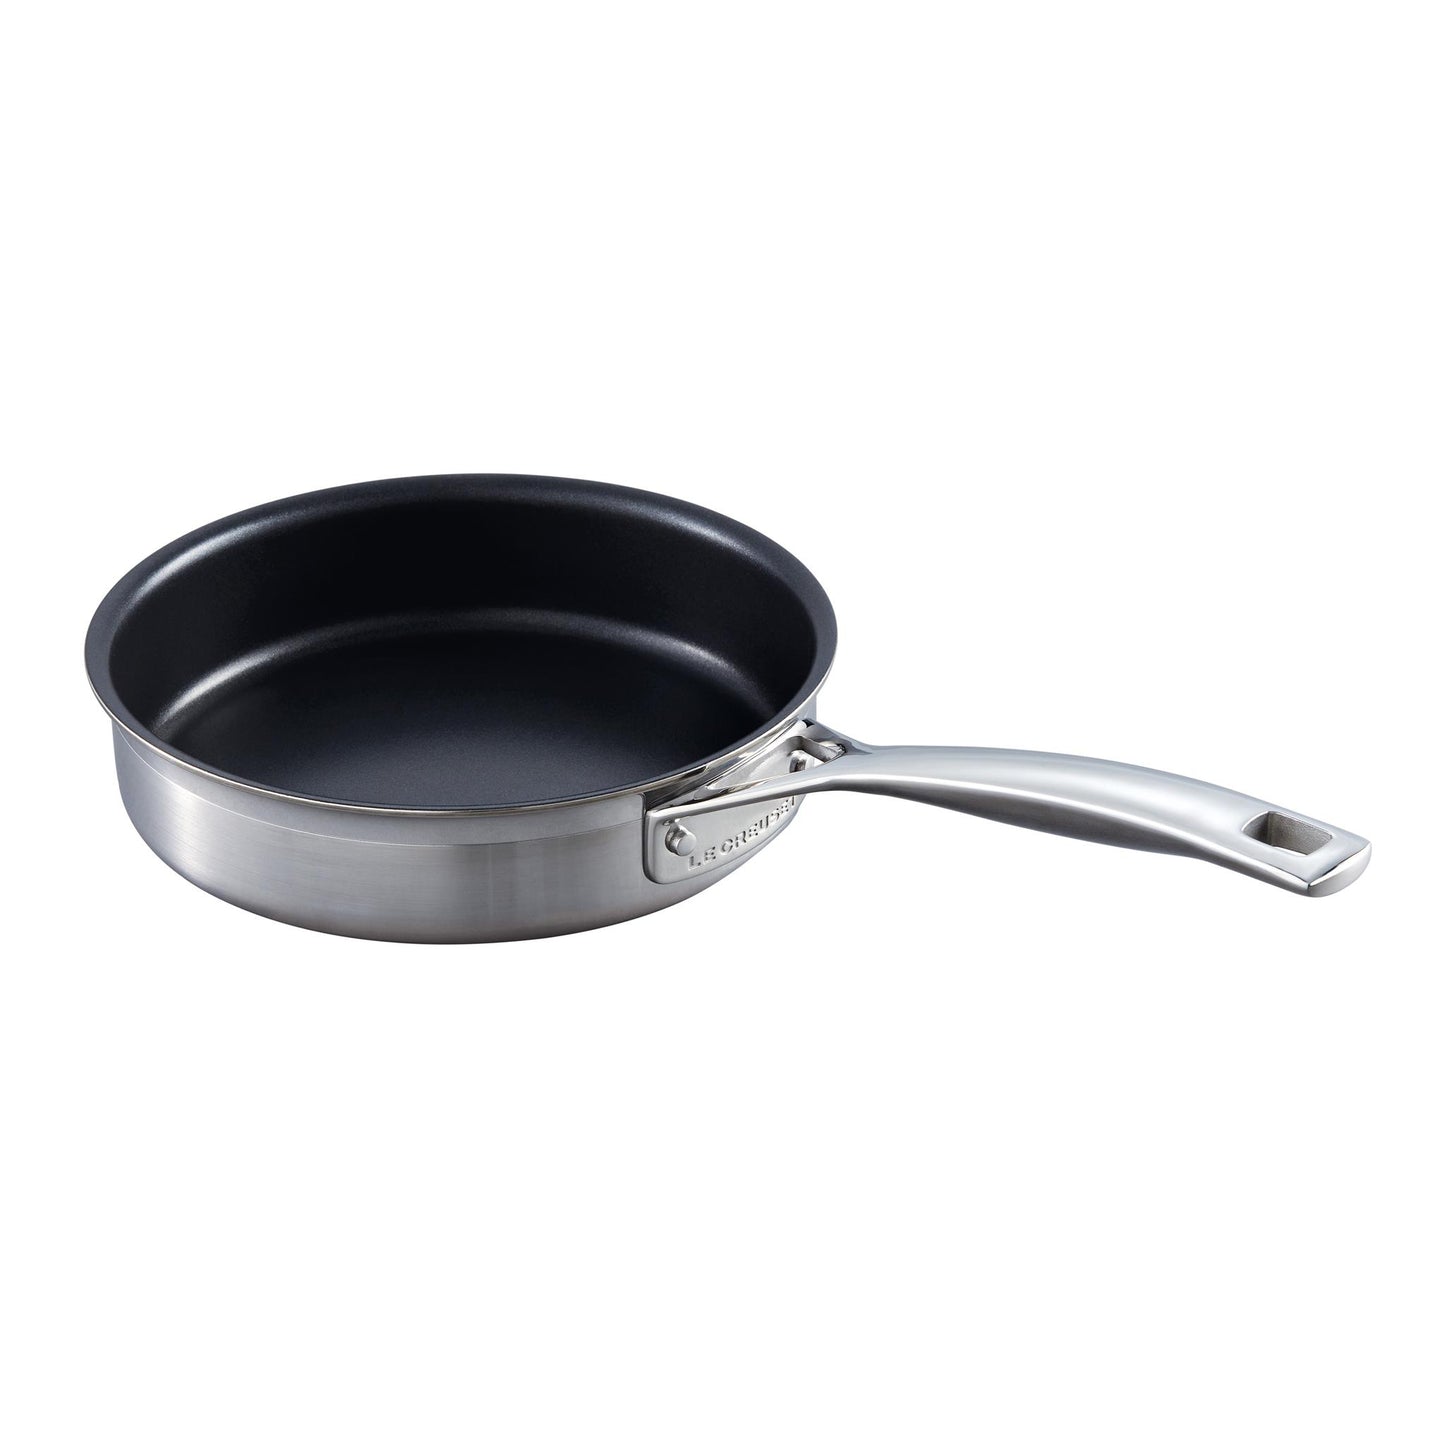 The Le Creuset saute pan with stainless steel exterior and handle and black non stick lining